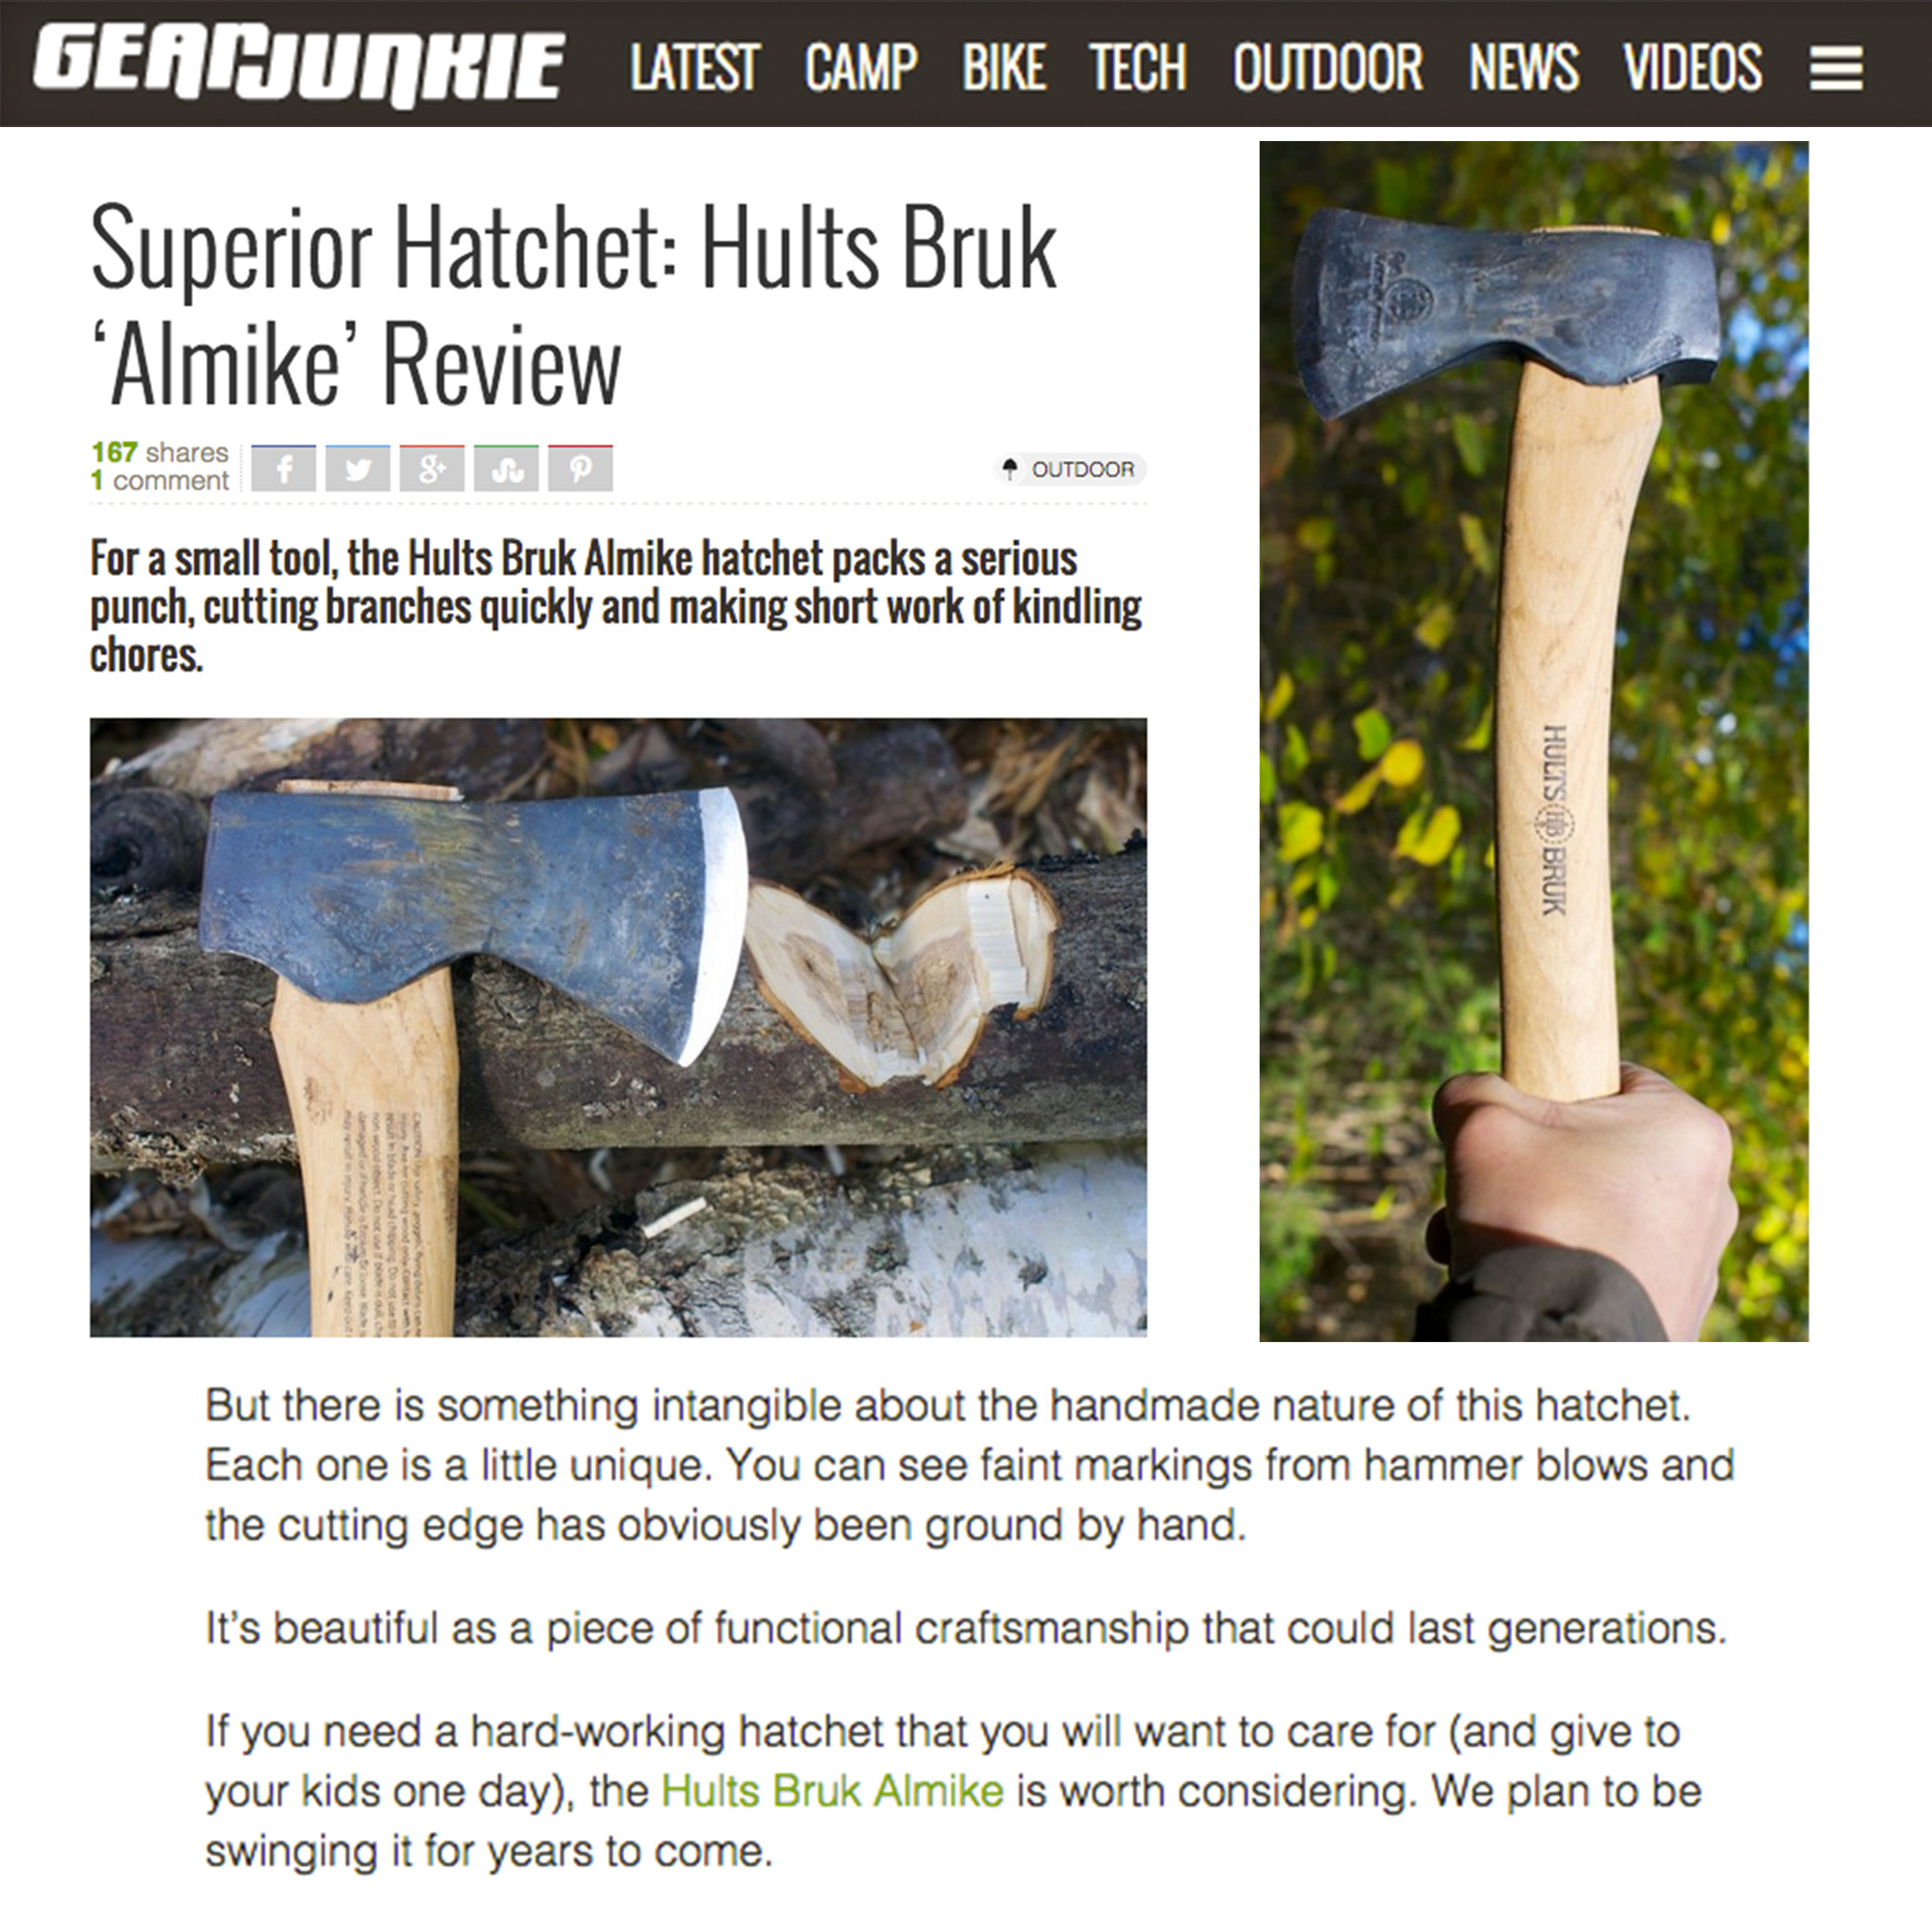 Gear Junkie Loves the Handmade Quirks of the Hults Bruk Almike